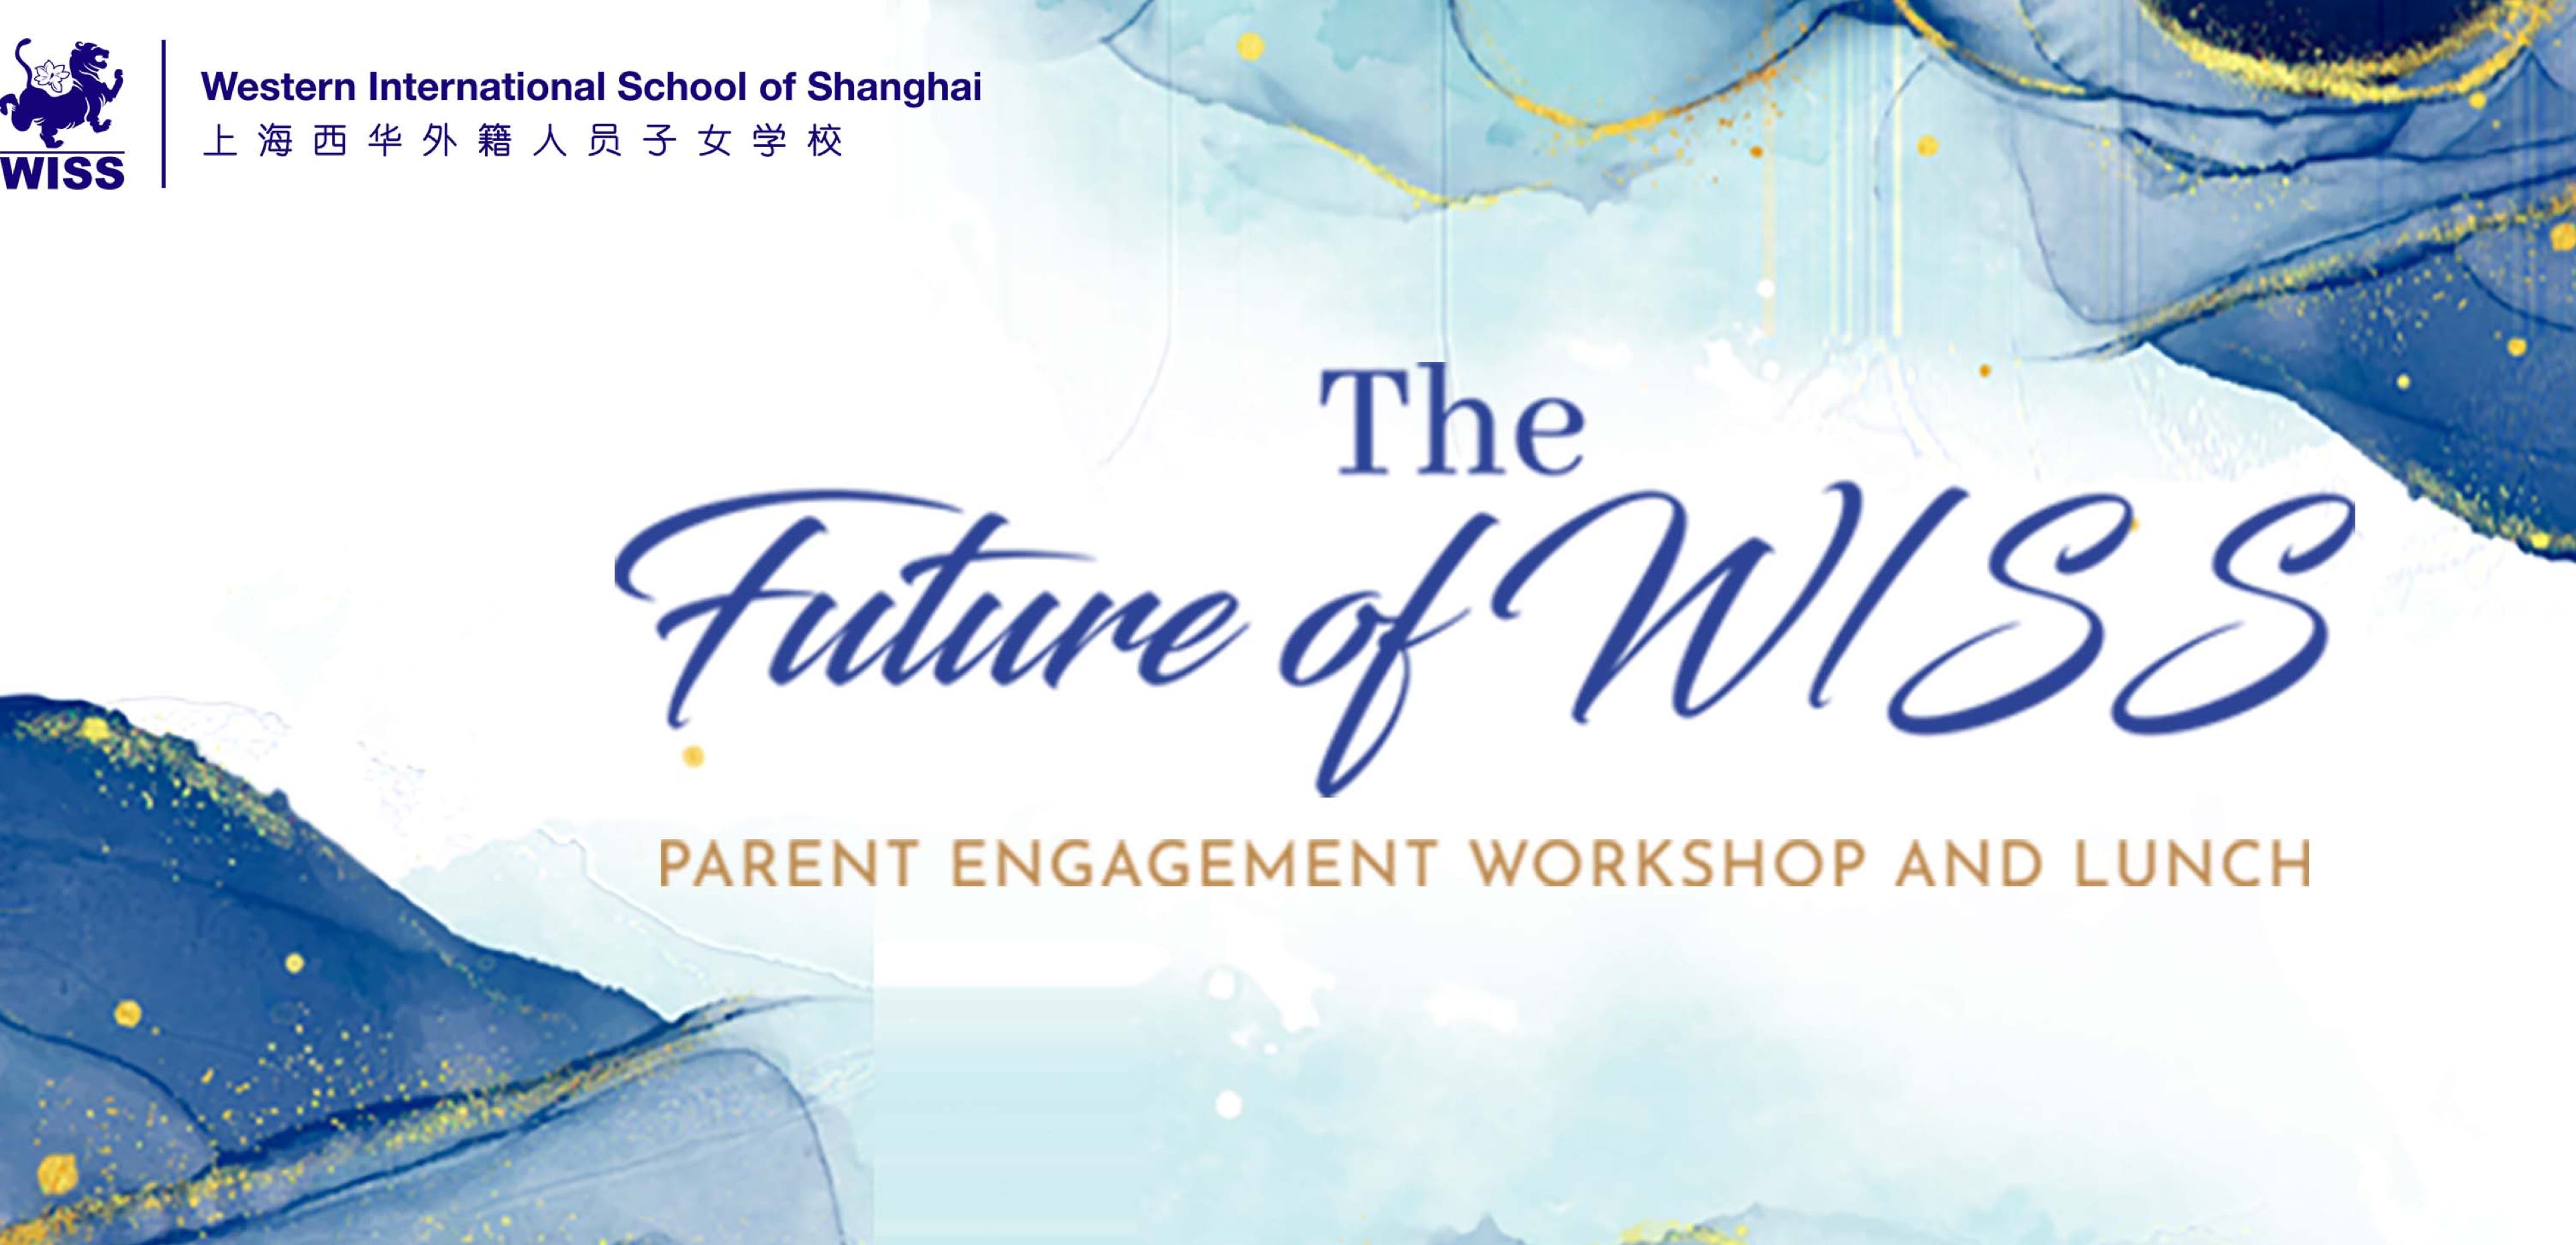 The Future of WISS | Parent Luncheon